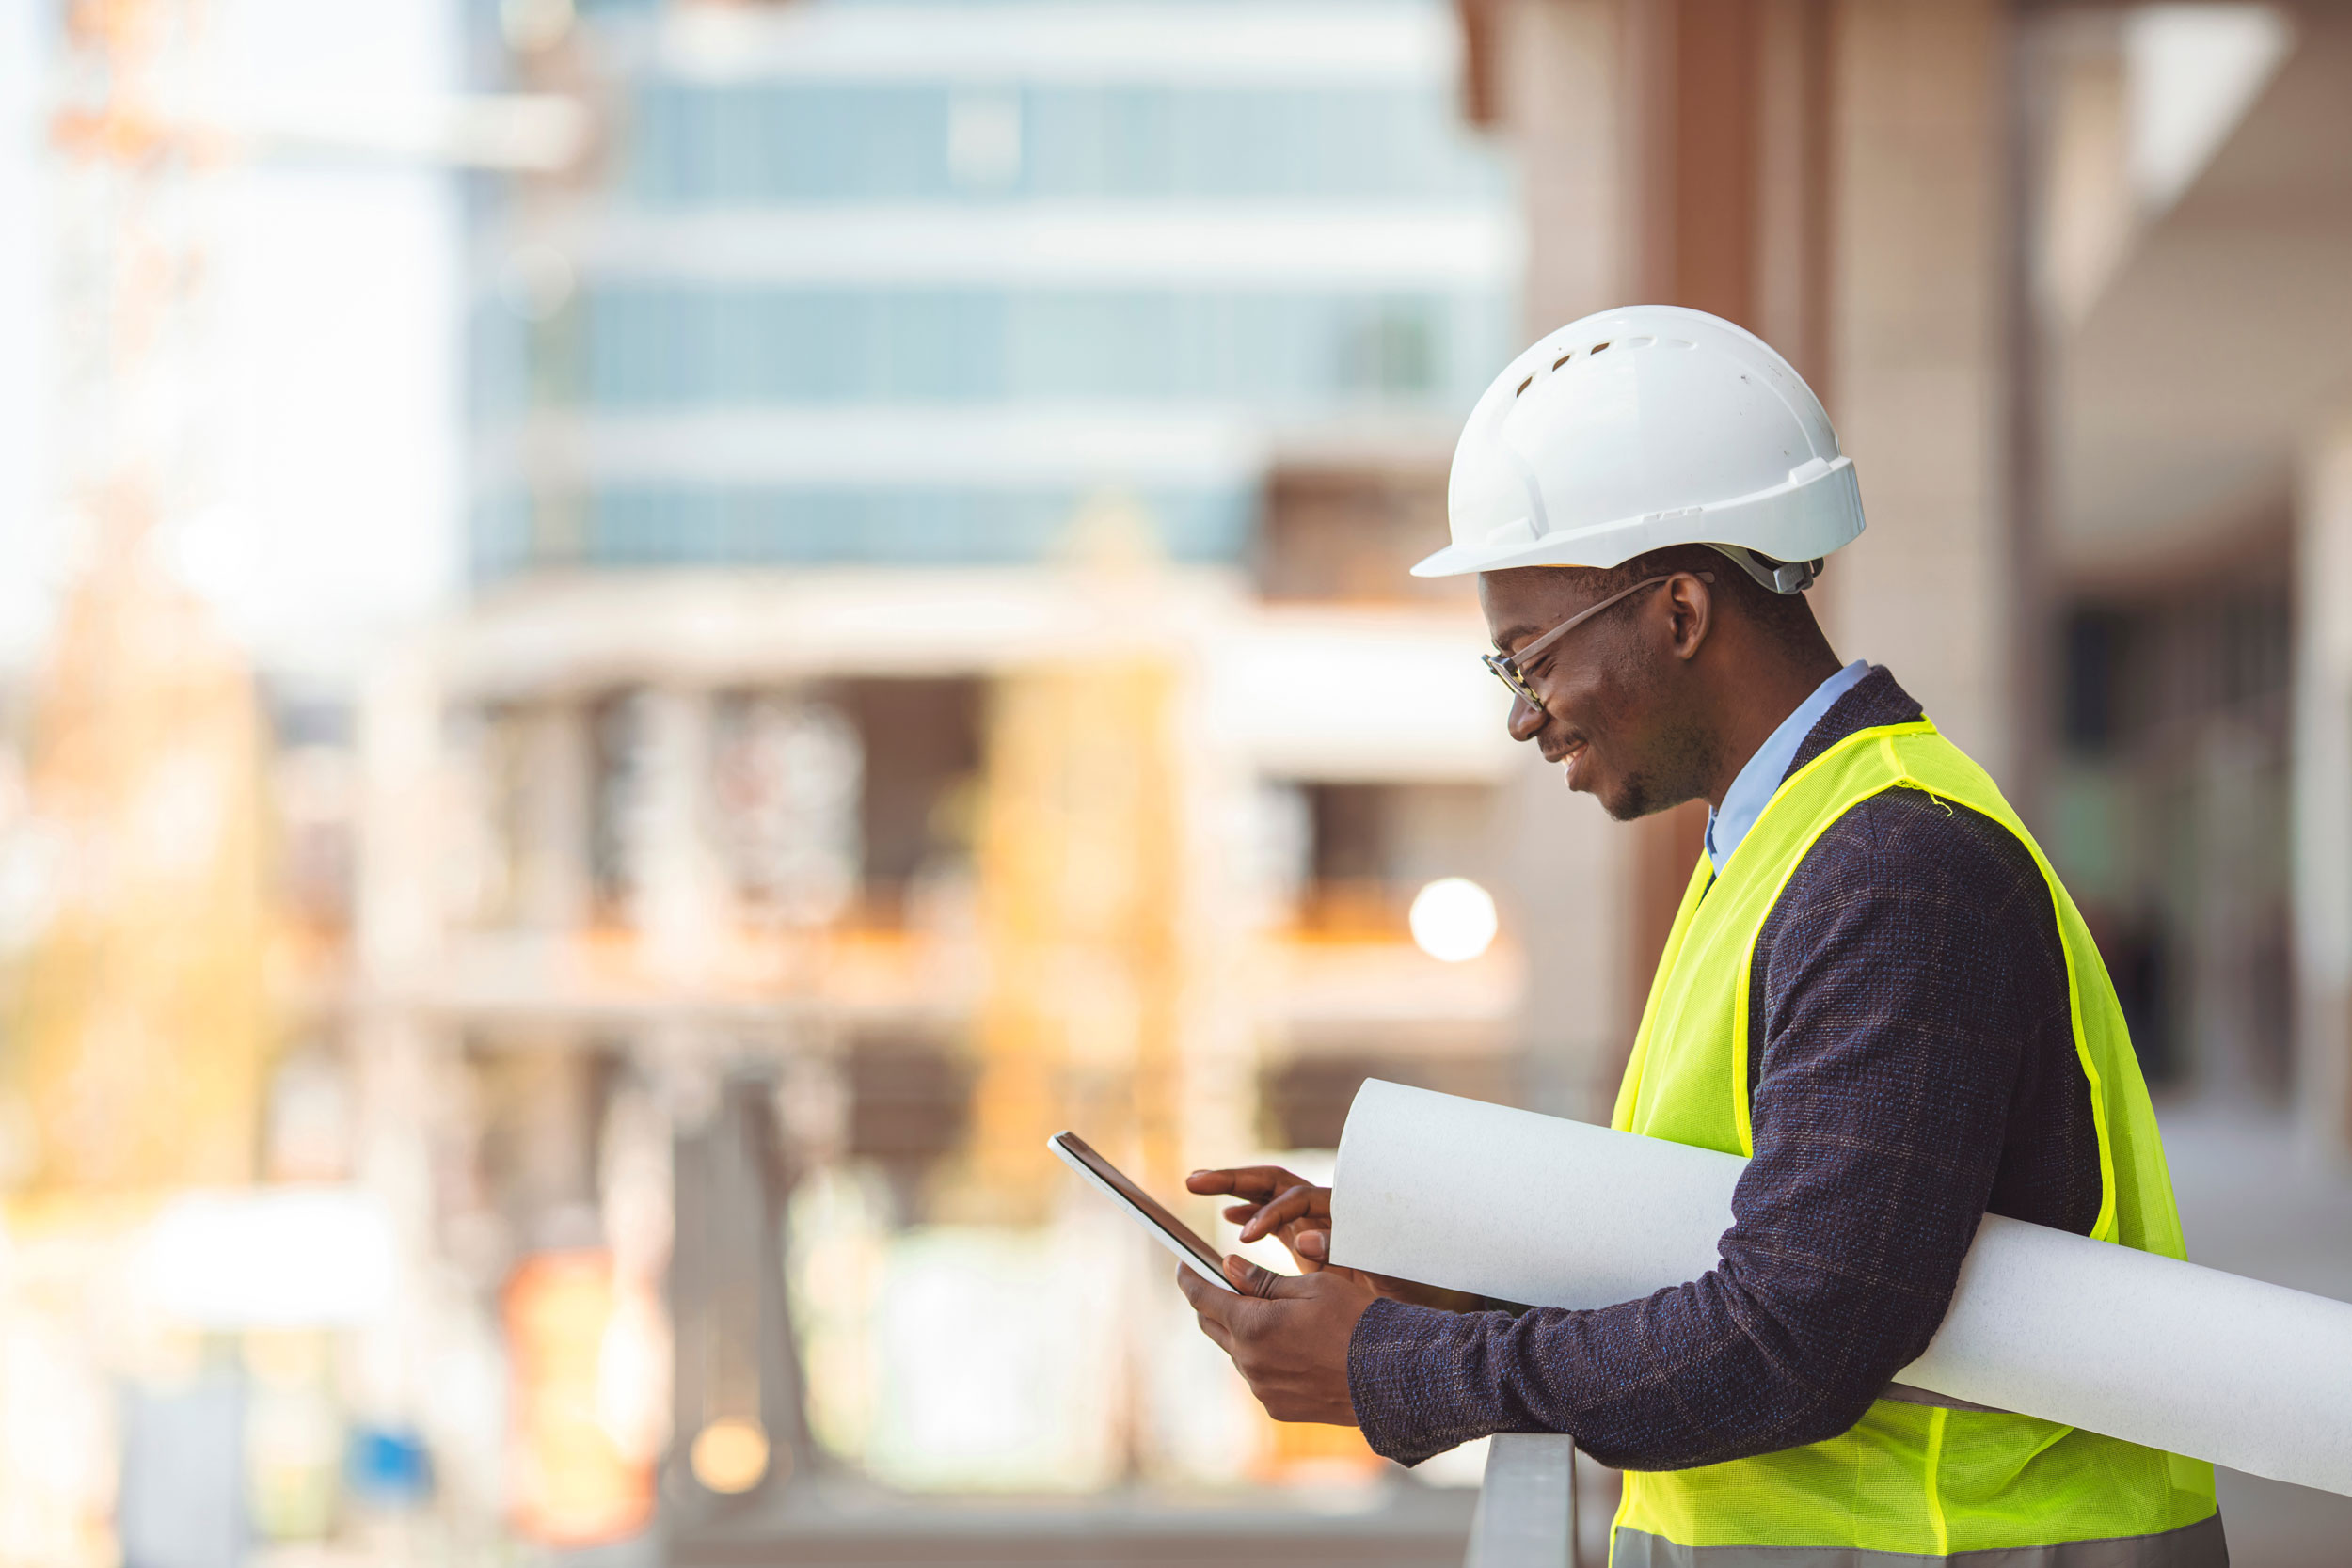 Male construction worker, wearing safeting vest and helmet interacting with mobile phone